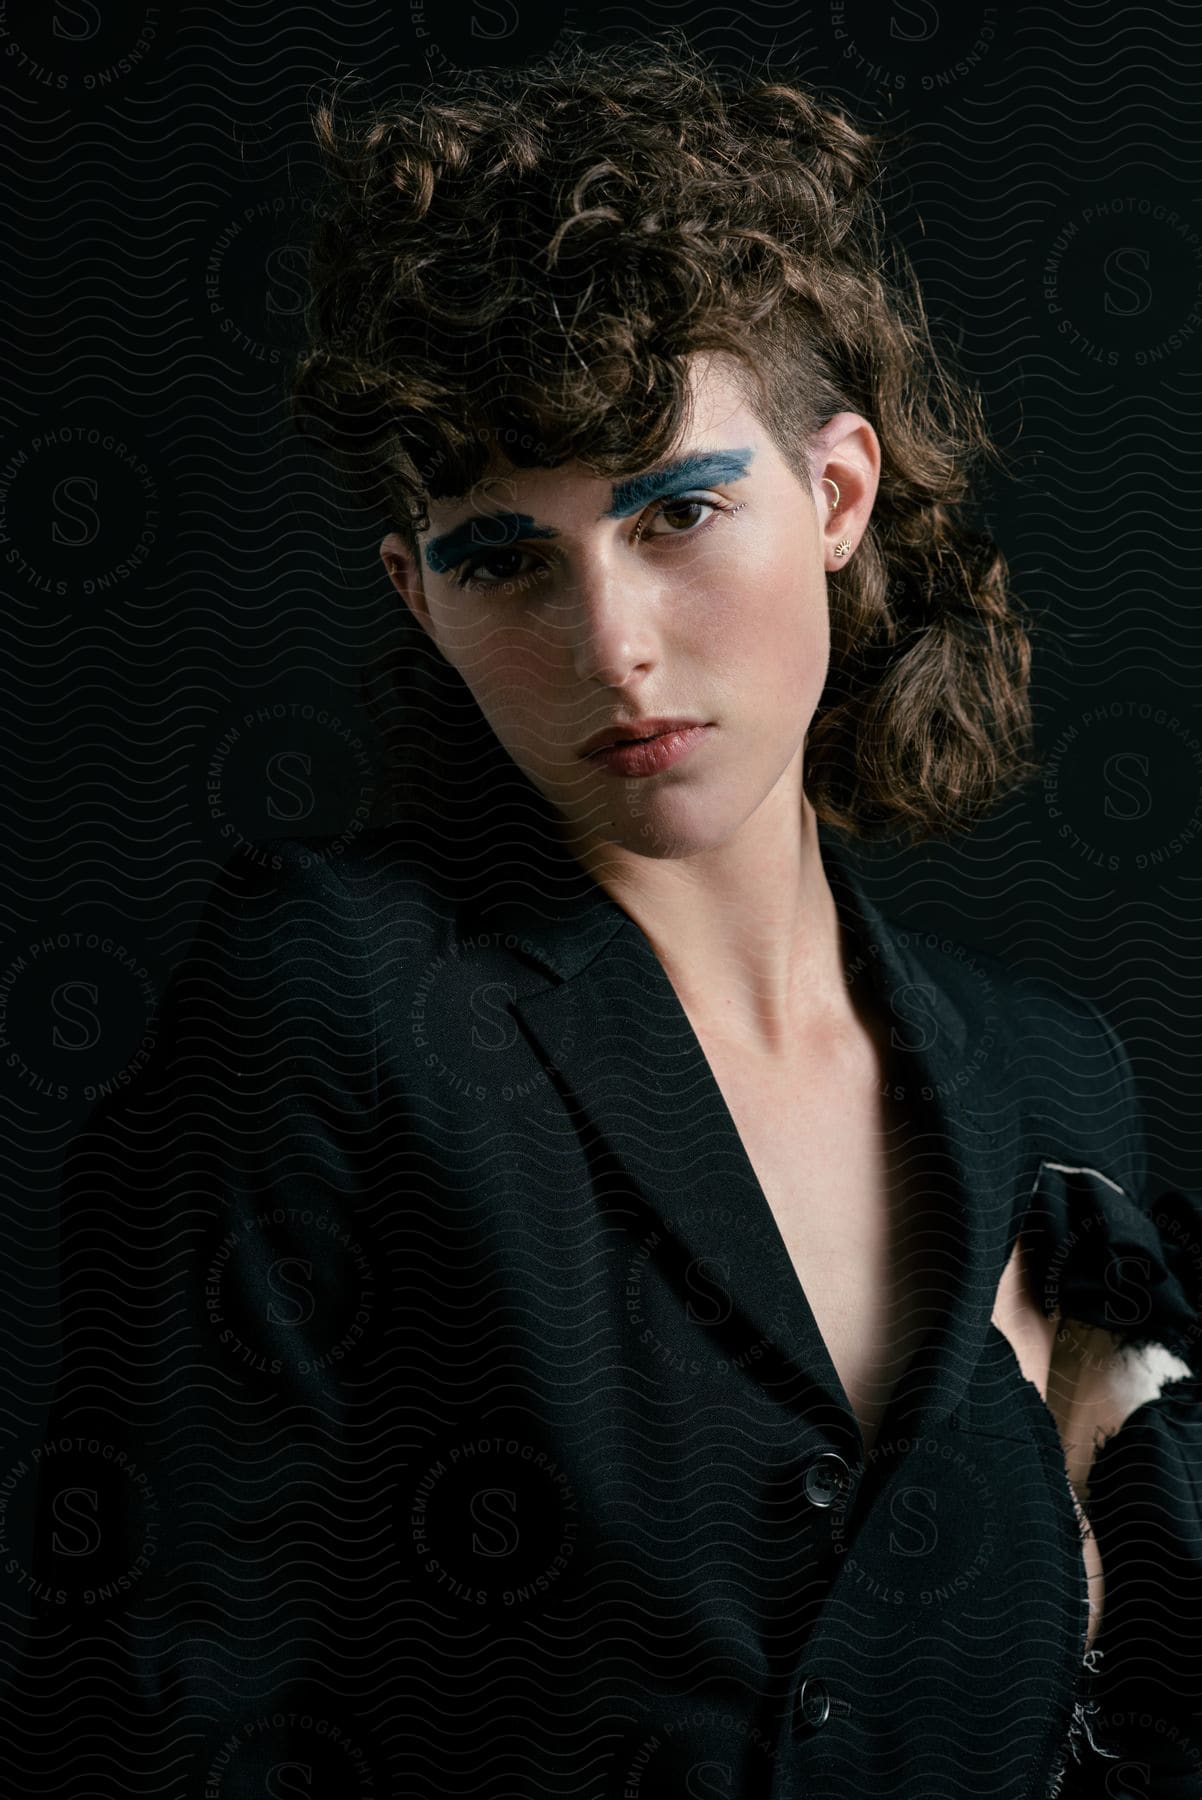 A woman with eyebrow makeup and black clothing posing.